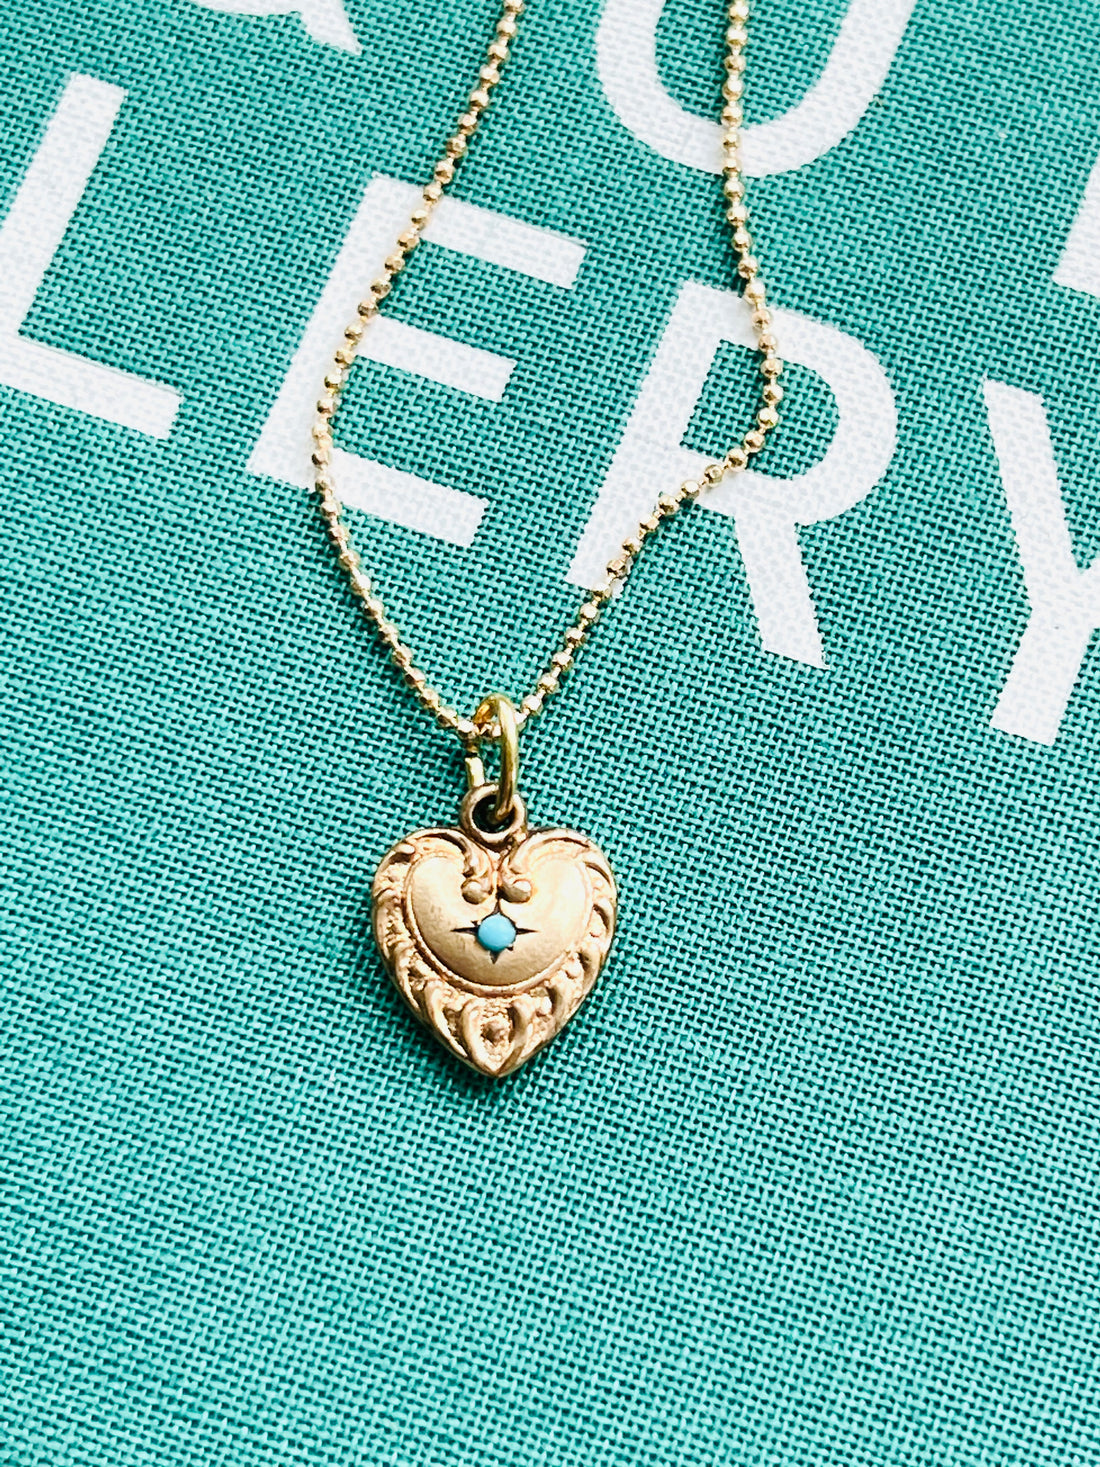 Vintage Repousse Heart Necklace with turquoise stone at the center by hipV Modern Vintage Jewelry.